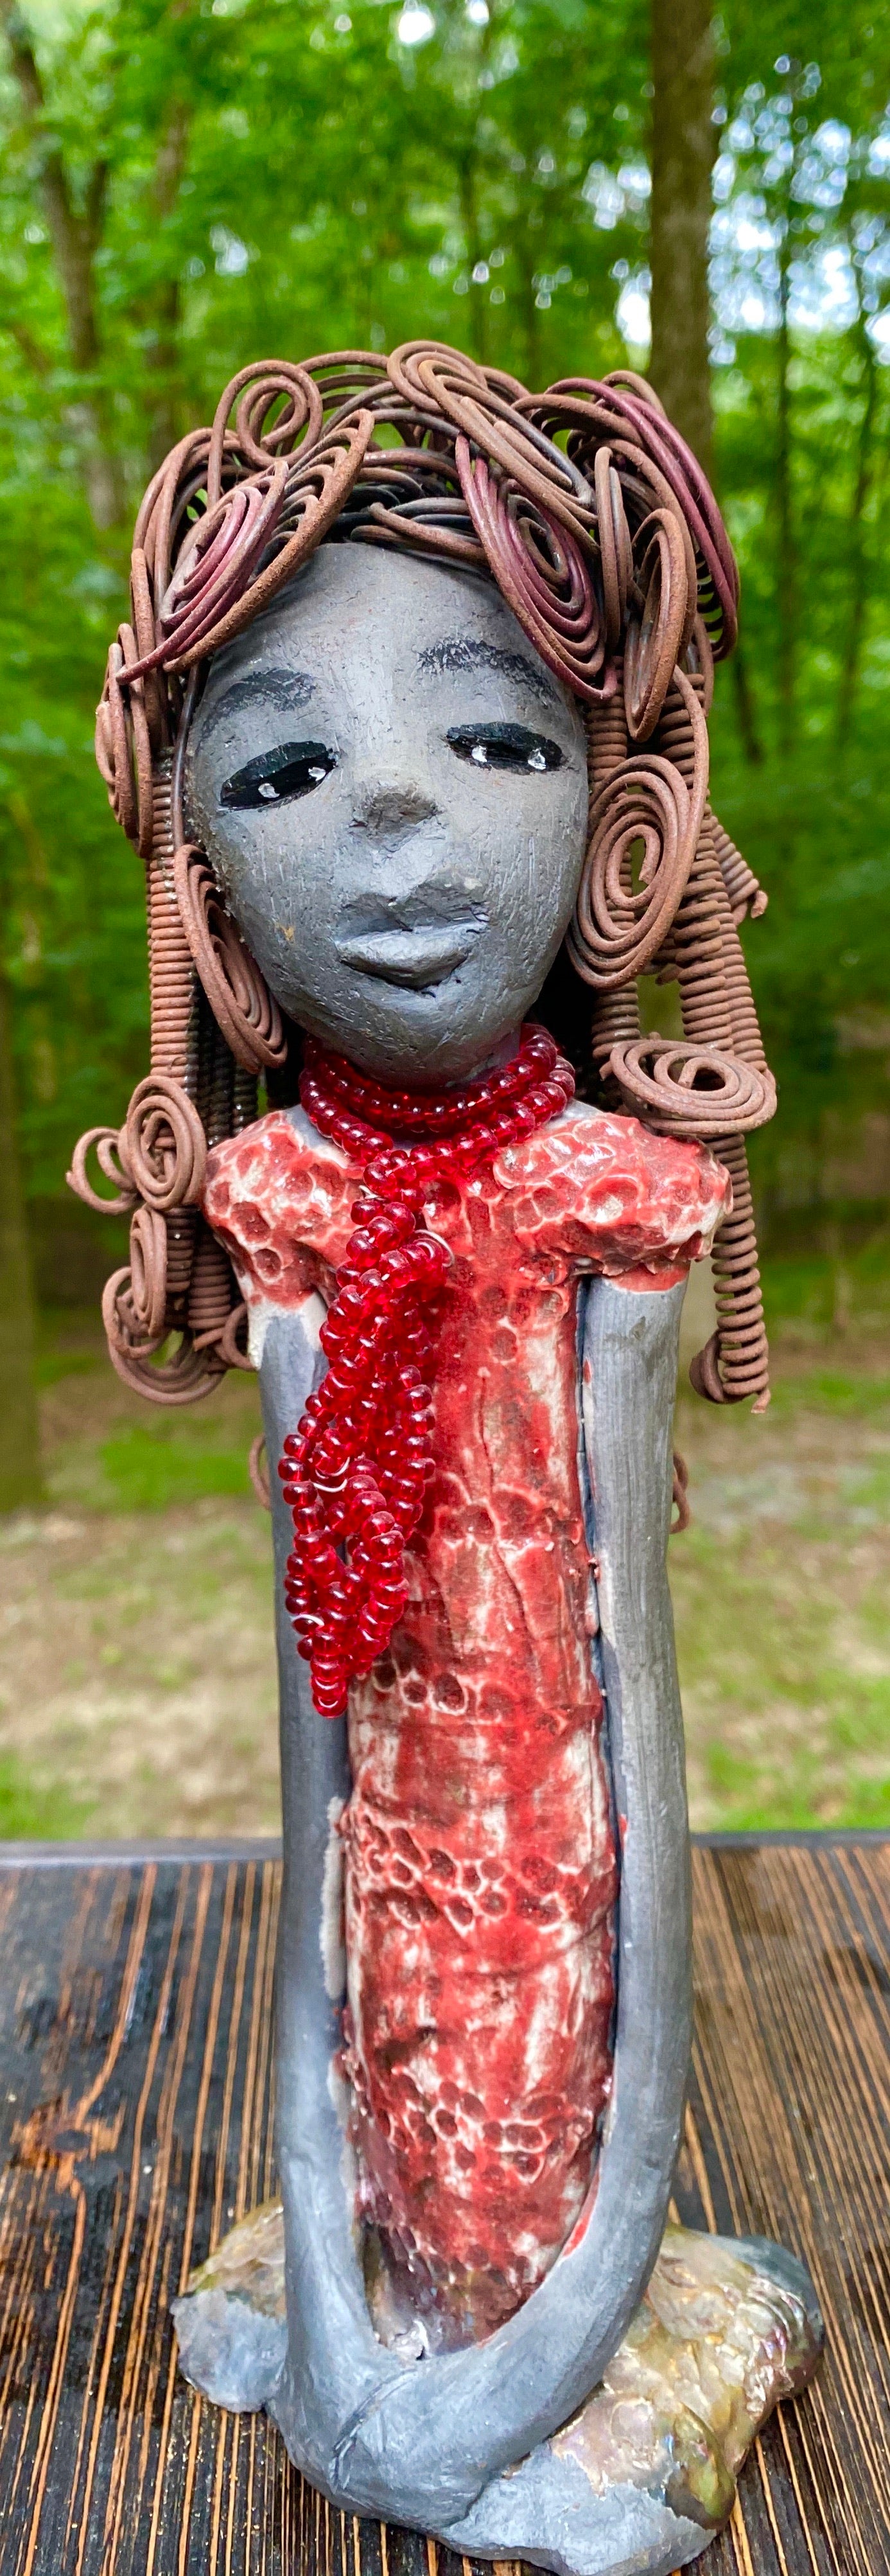 Meet Reagan! Reagan stands 12" x 4" x 4" and weighs 2.10 lbs. Reagan has a lovely dark complexion. It took over two hours to fix her Herdew! It is made of 16 gauge wire. Reagan has a shimmering  metallic copper red dress. A strand of ruby red beads hangs around her neck. Reagan and her sister Carolyn are one of a kind. ( Sold Separately) Give Reagan and Carolyn a great Home!